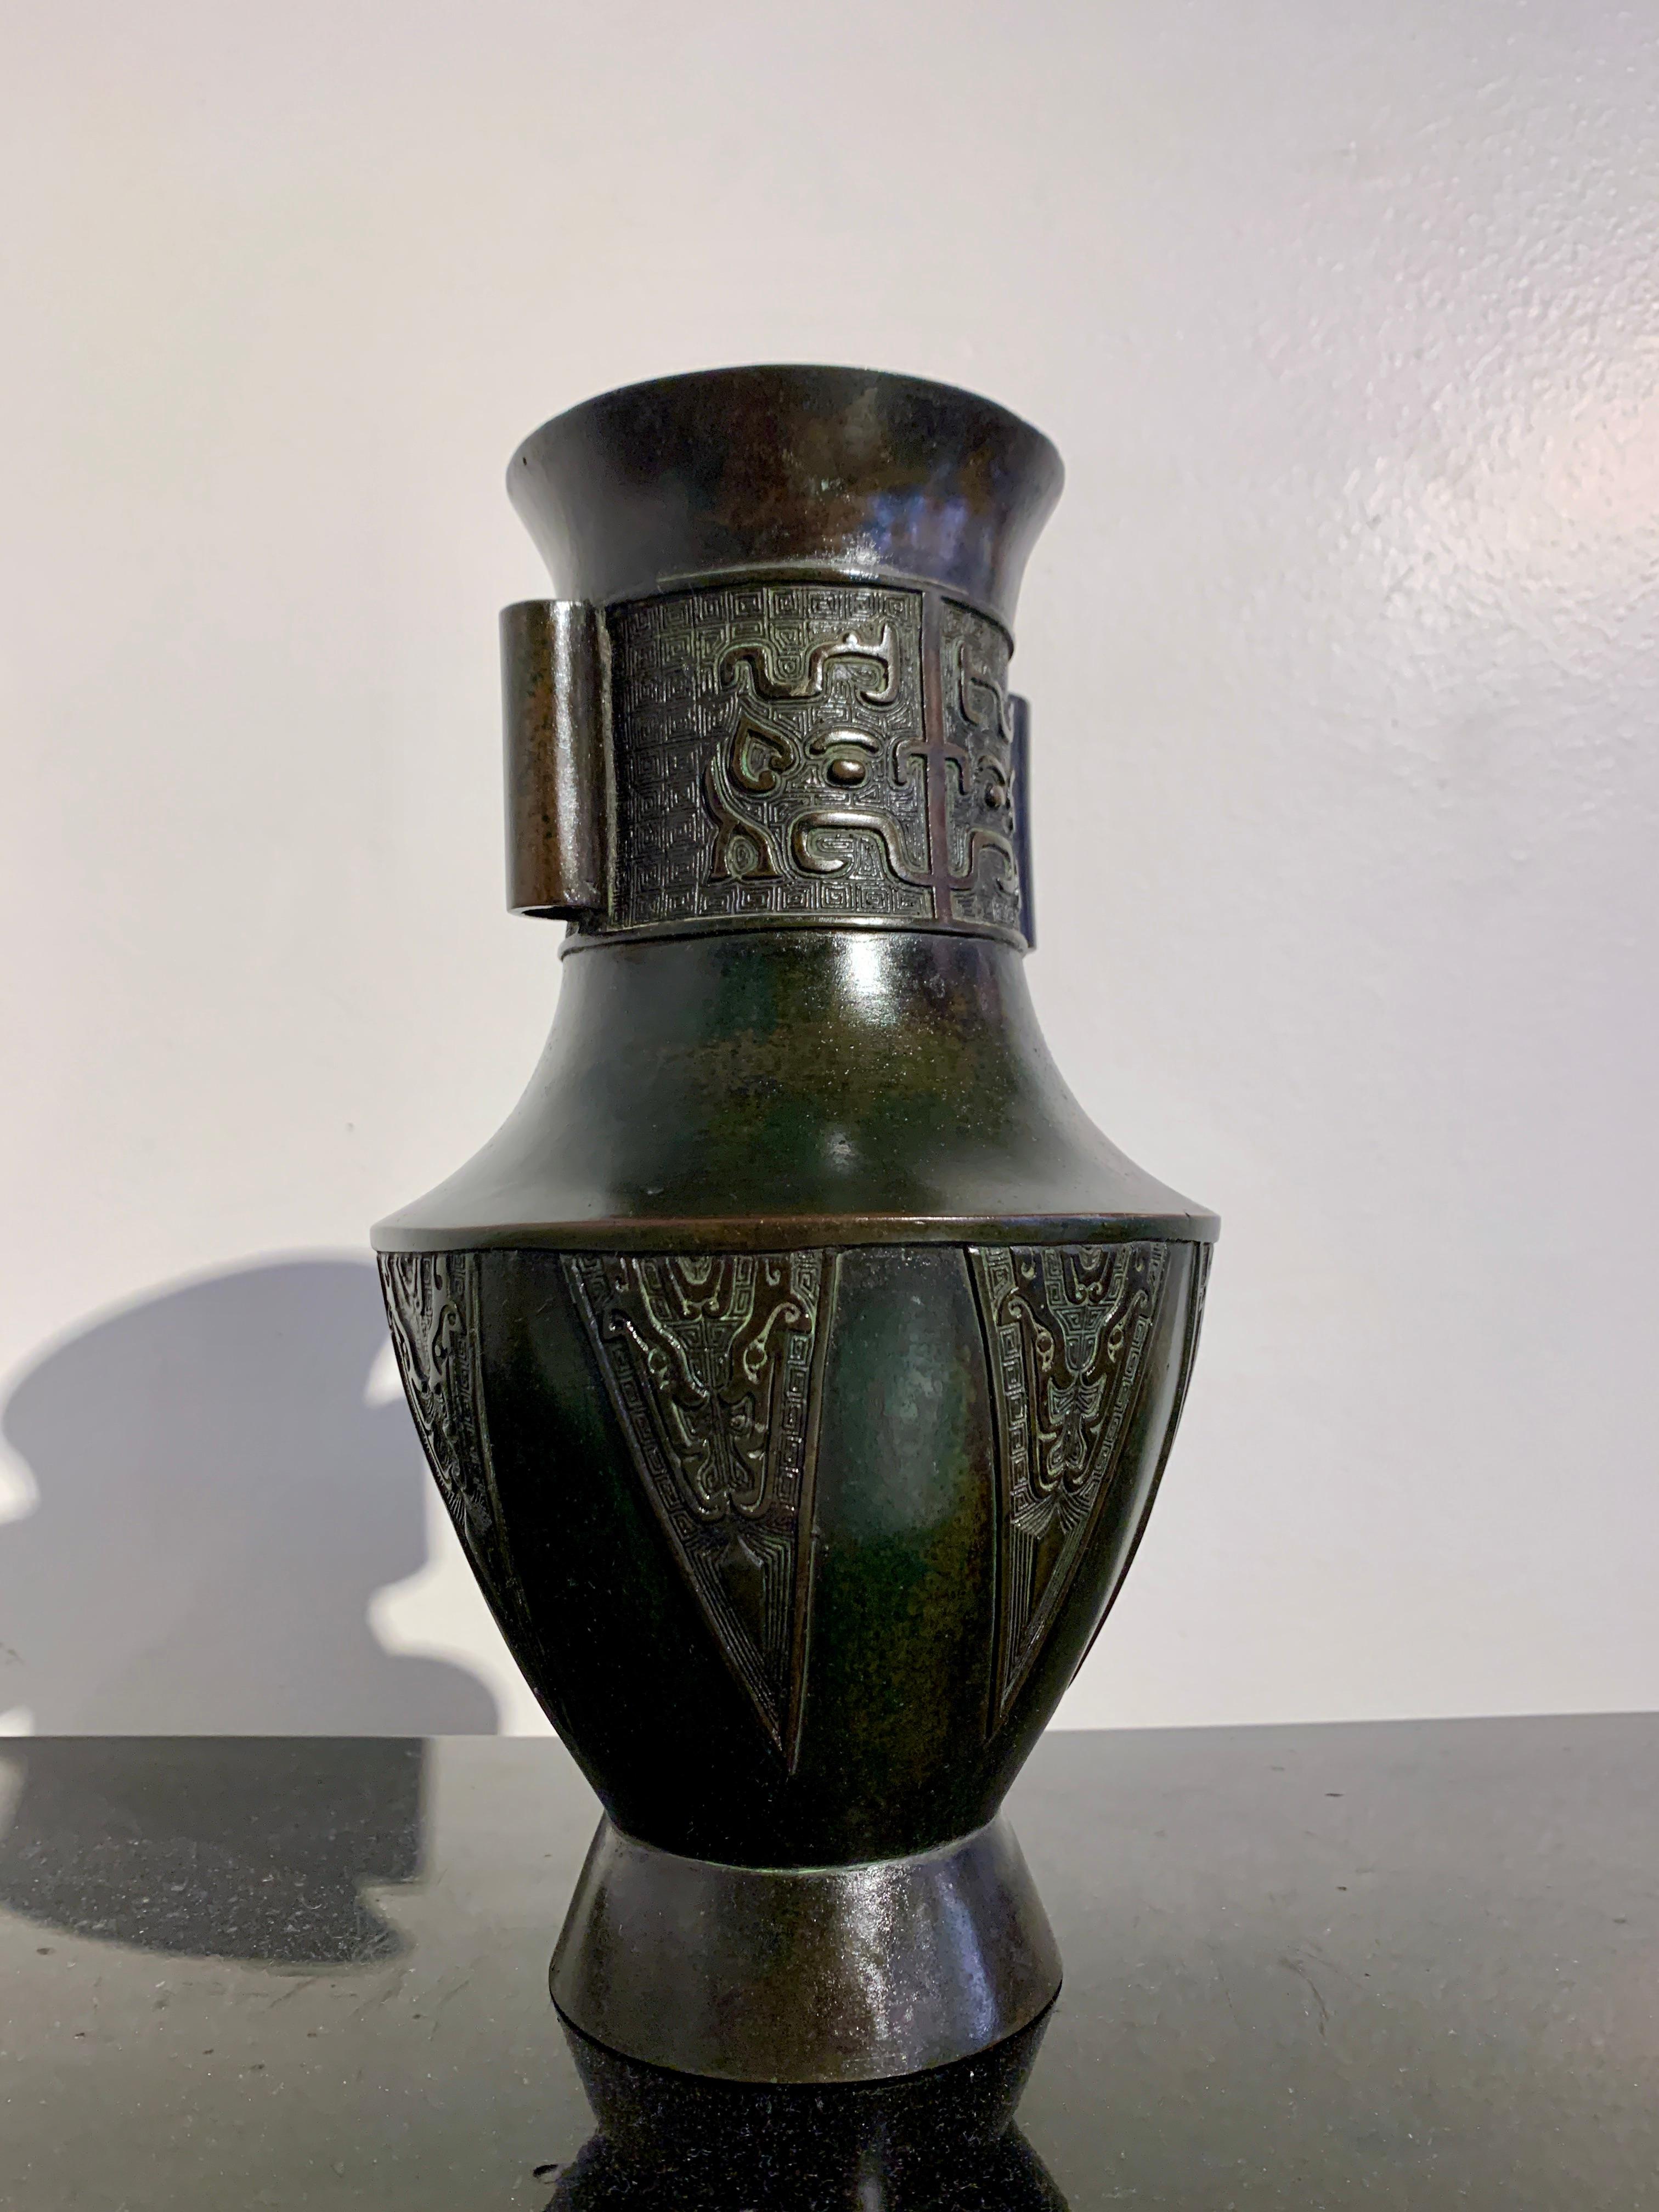 An attractive and well cast Chinese archaistic bronze altar vase, hu, Republic Period (1911 to 1949), early 20th century, circa 1920, China.

The vase of elegant proportions, with a tapered body resting on a high, splayed foot. The low, angular